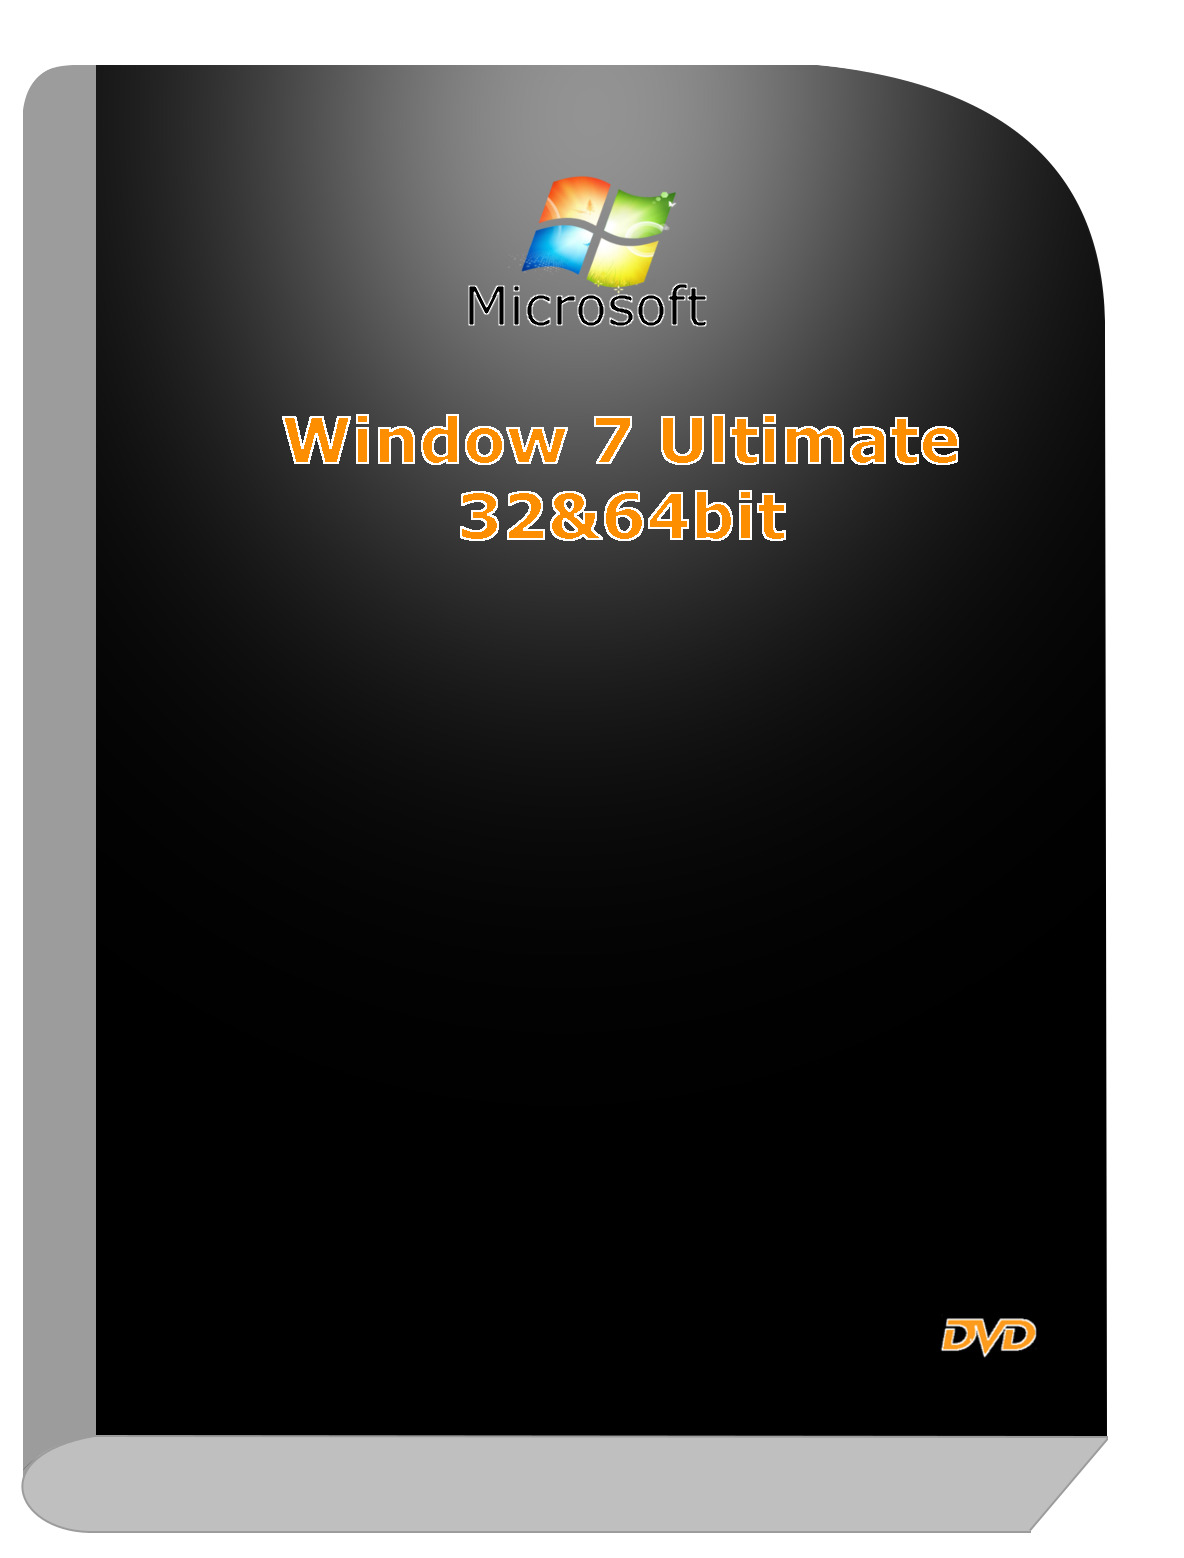 Microsoft Window Ultimate 32/64bit Operation System DVD & Remove Activation CD 